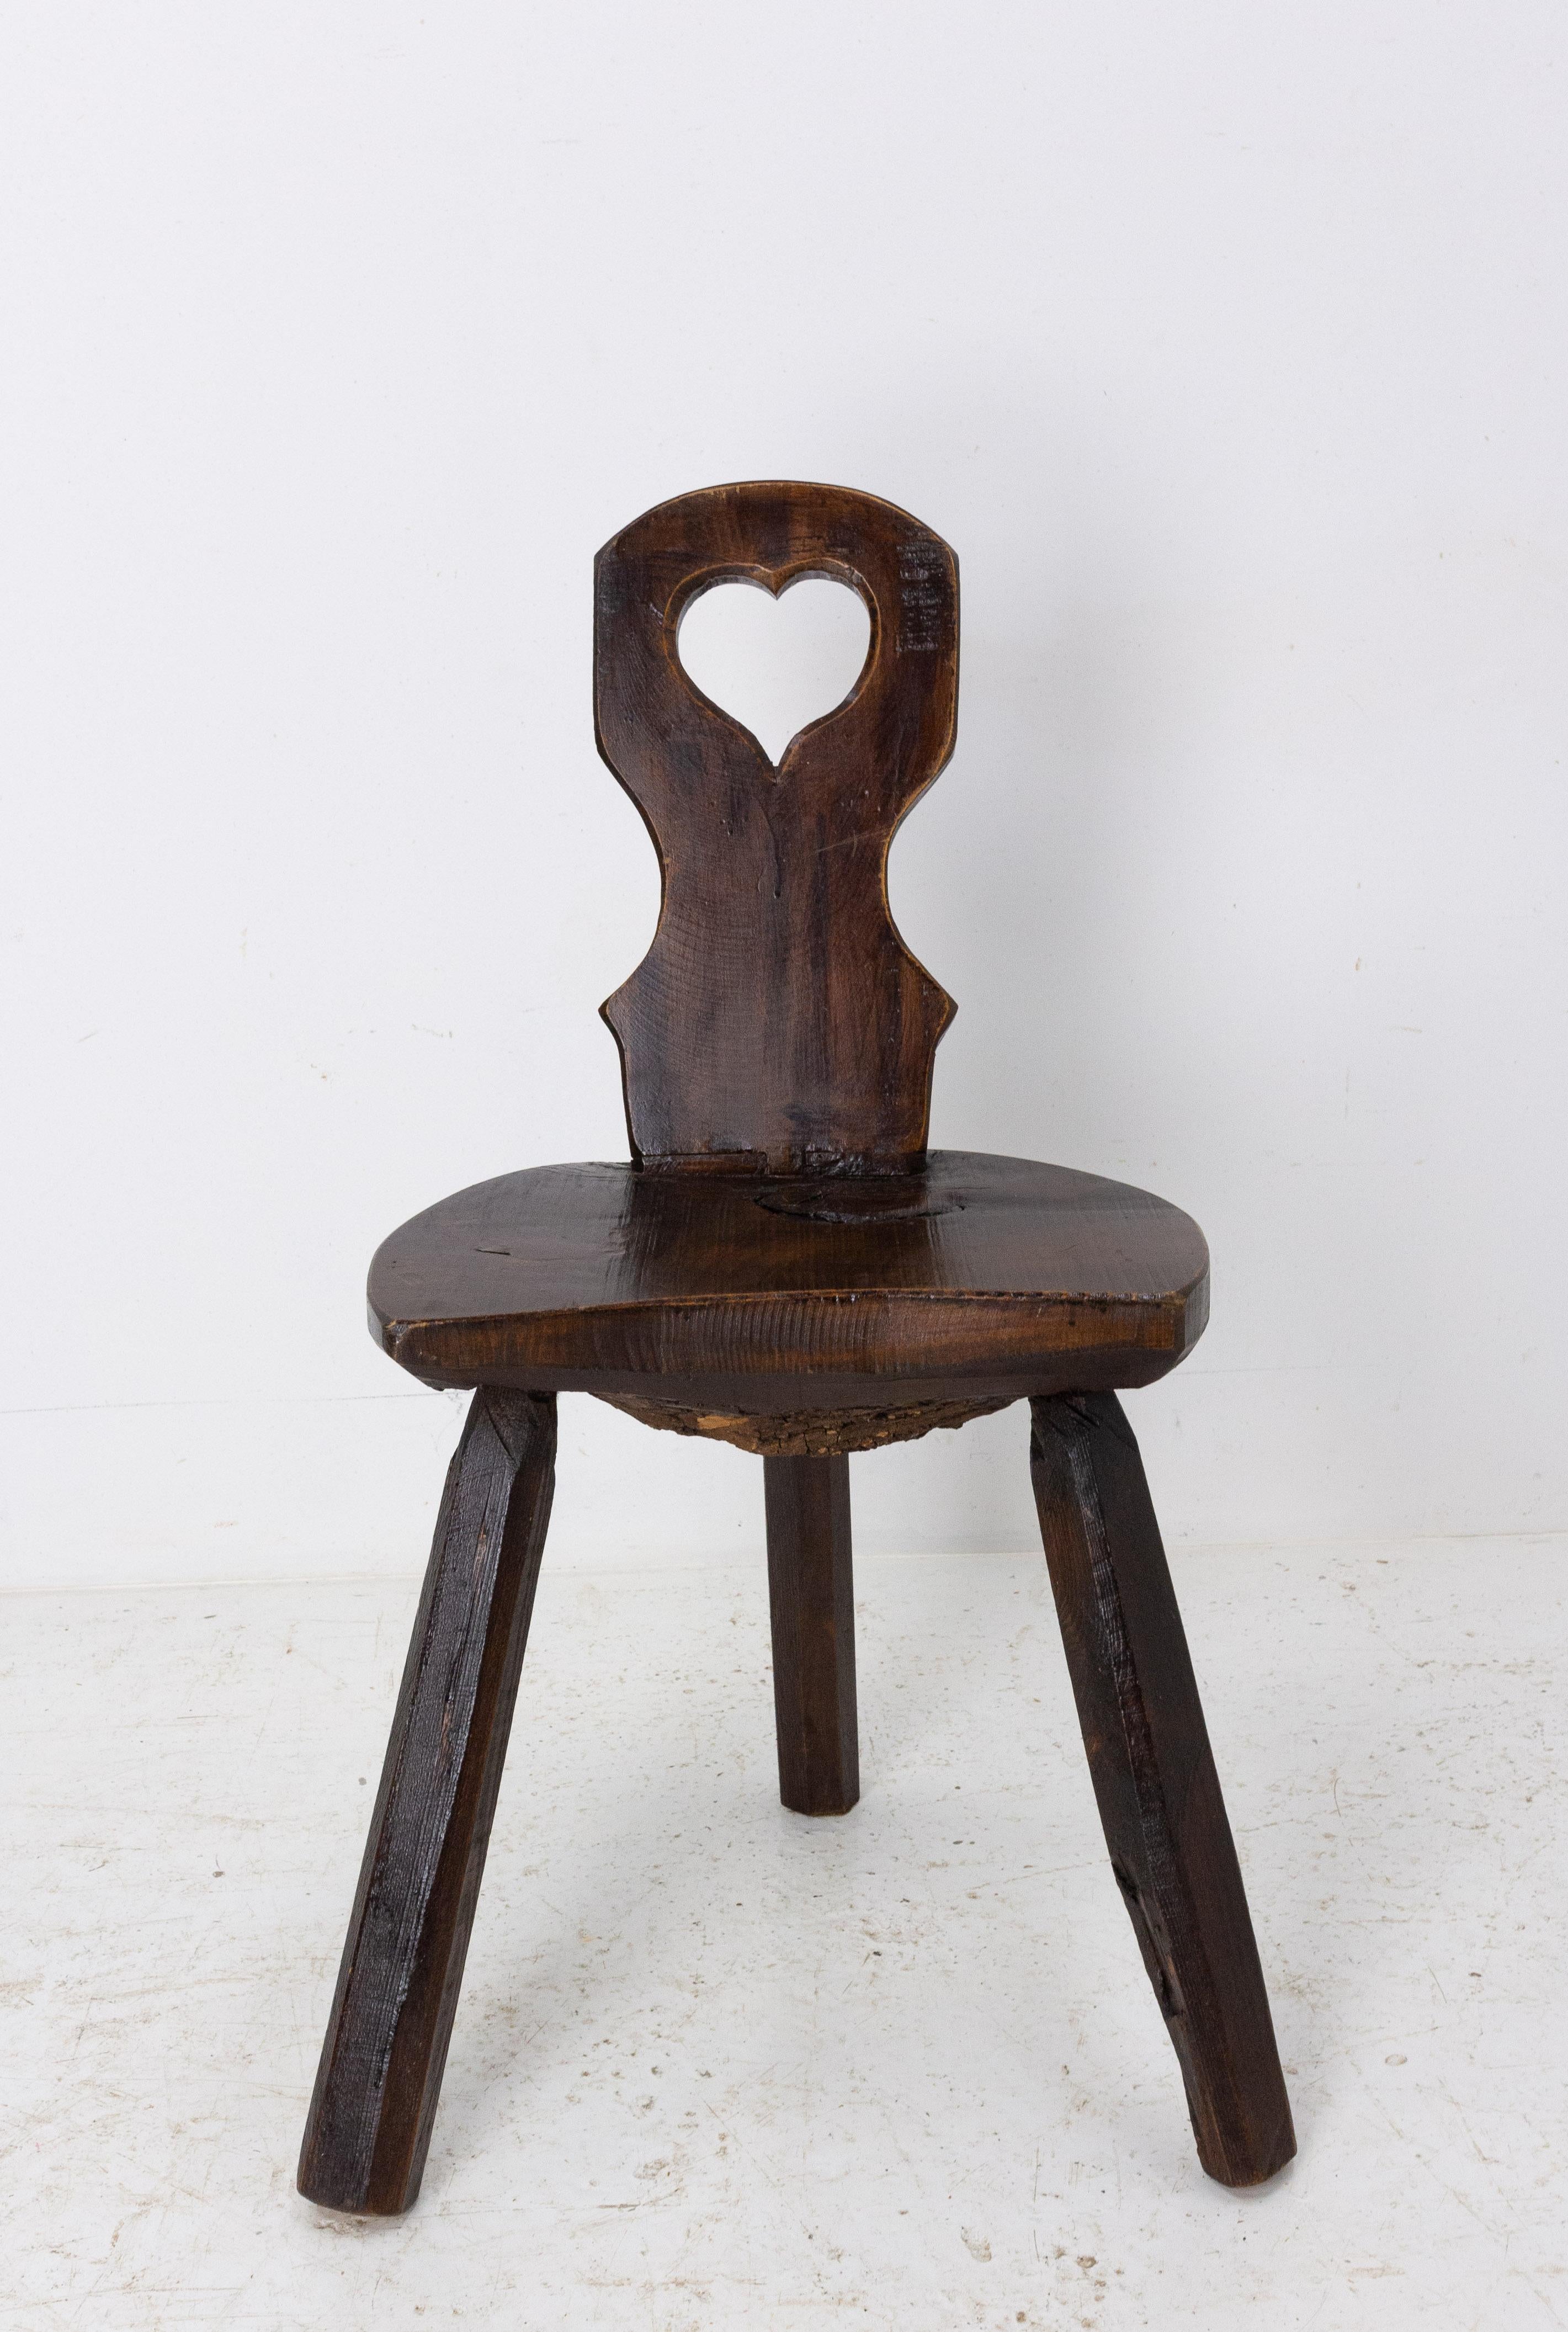 Side chair, Swiss Alp escabelle, three legs chair
French, circa 1900
Massive carved wood, brutalist
Characterful
Good condition, solid and sound

Shipping:
L41 P43 H72 4Kg.
   